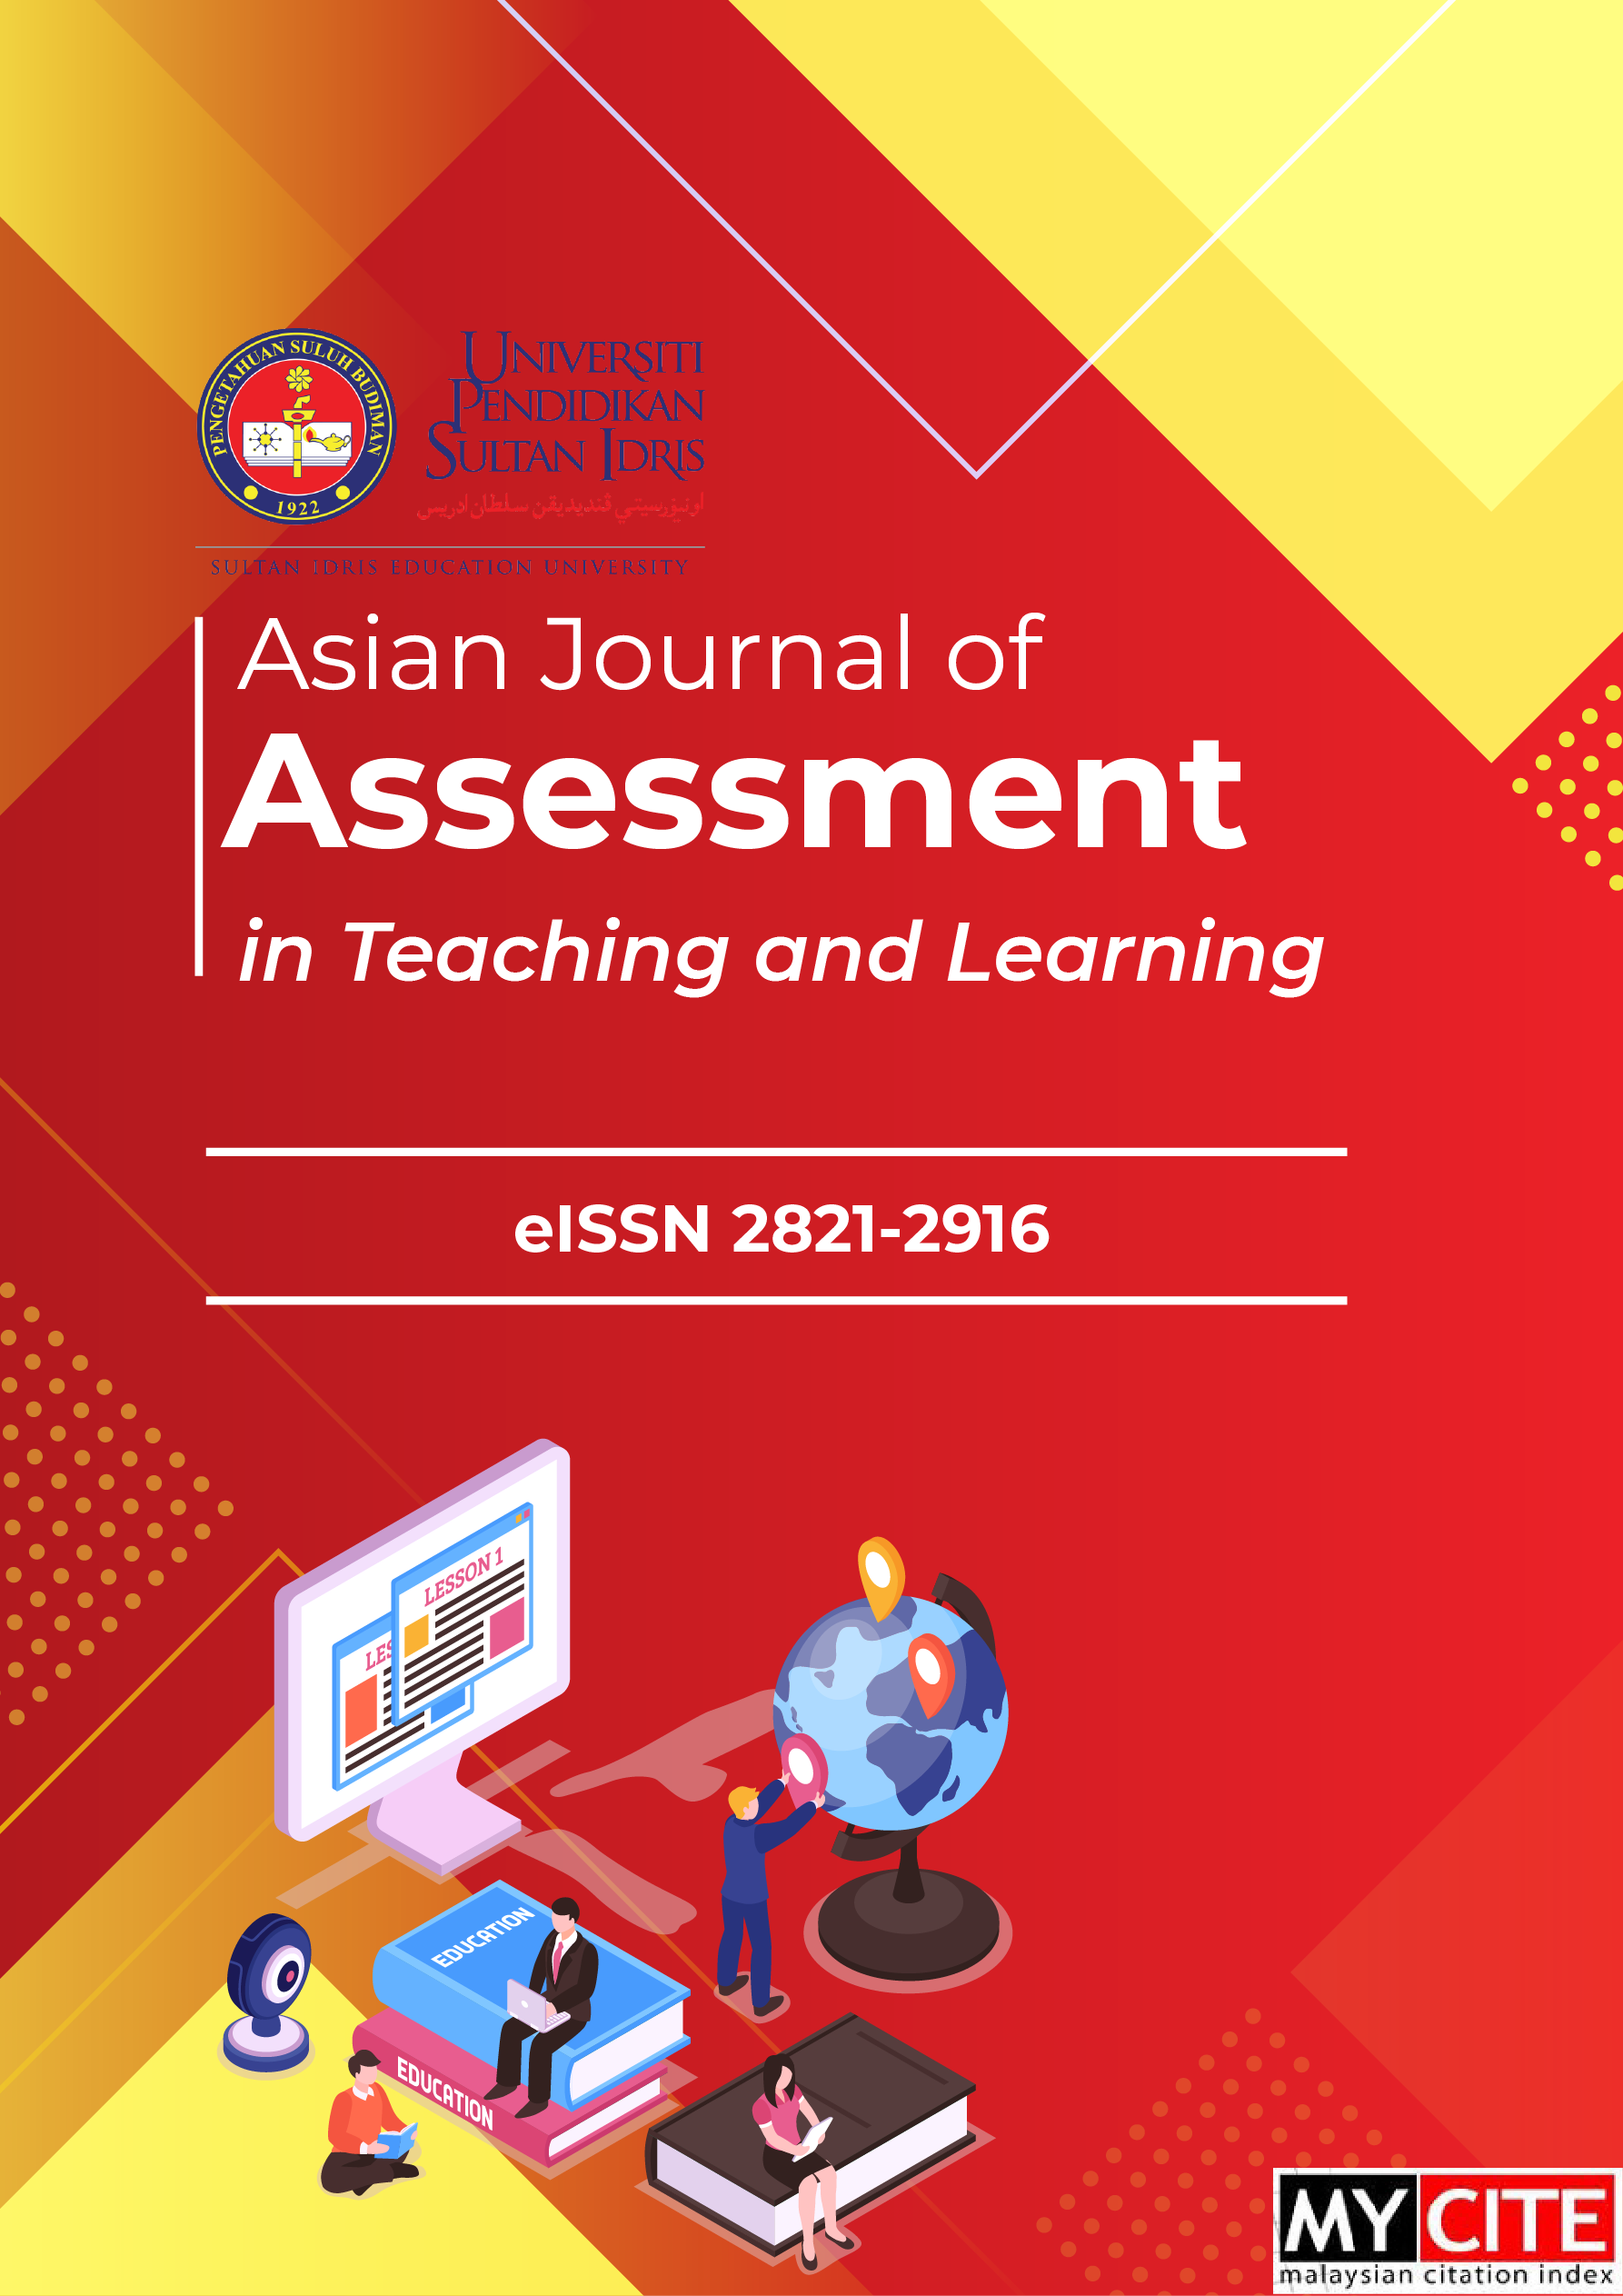 					View Vol. 9 No. 1 (2019): Asian Journal of Assessment in Teaching and Learning
				